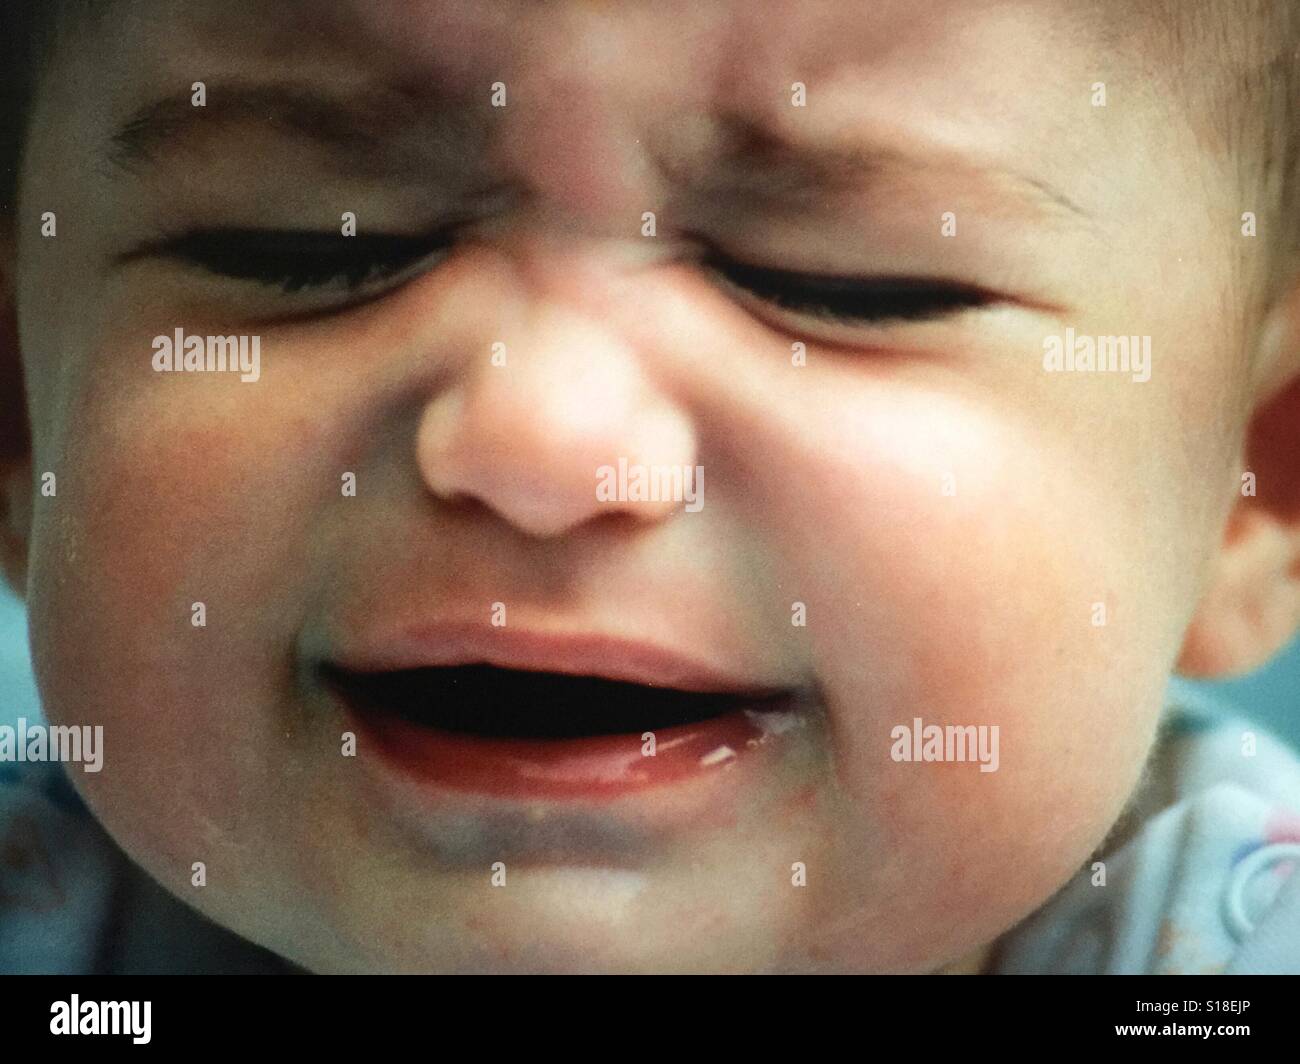 A close up image of a baby who is crying angrily Stock Photo